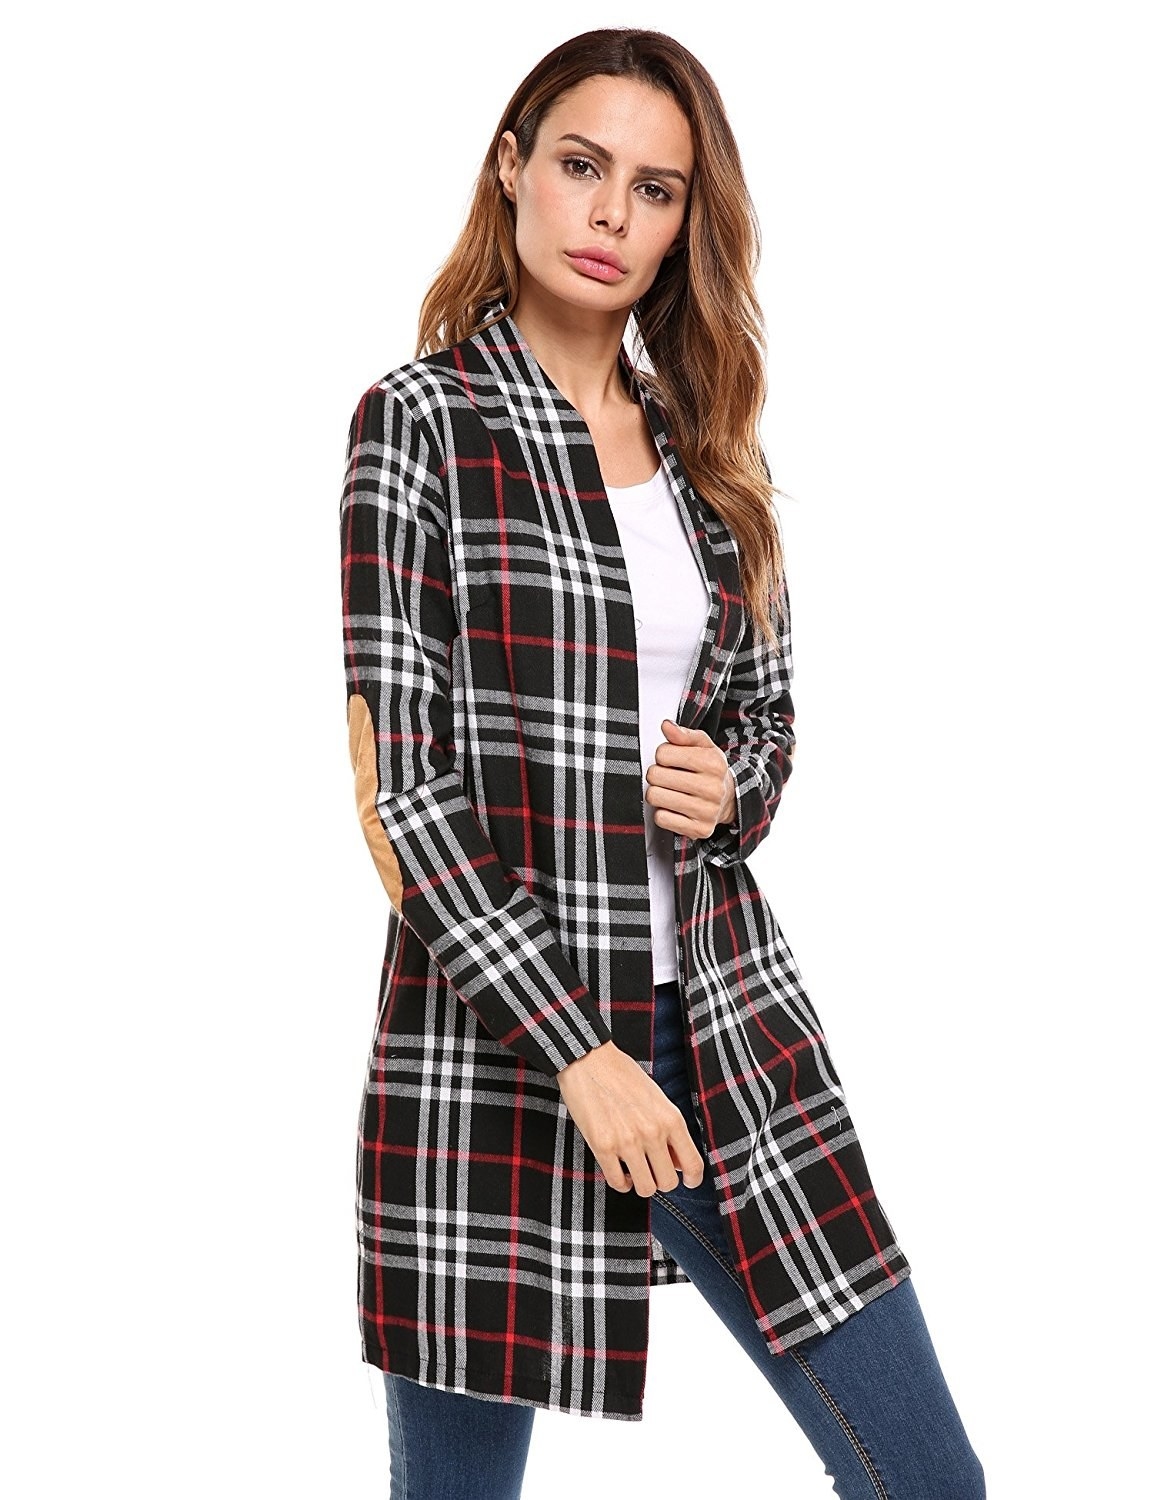 25 Adorable Flannel Things To Wear All Autumn Long